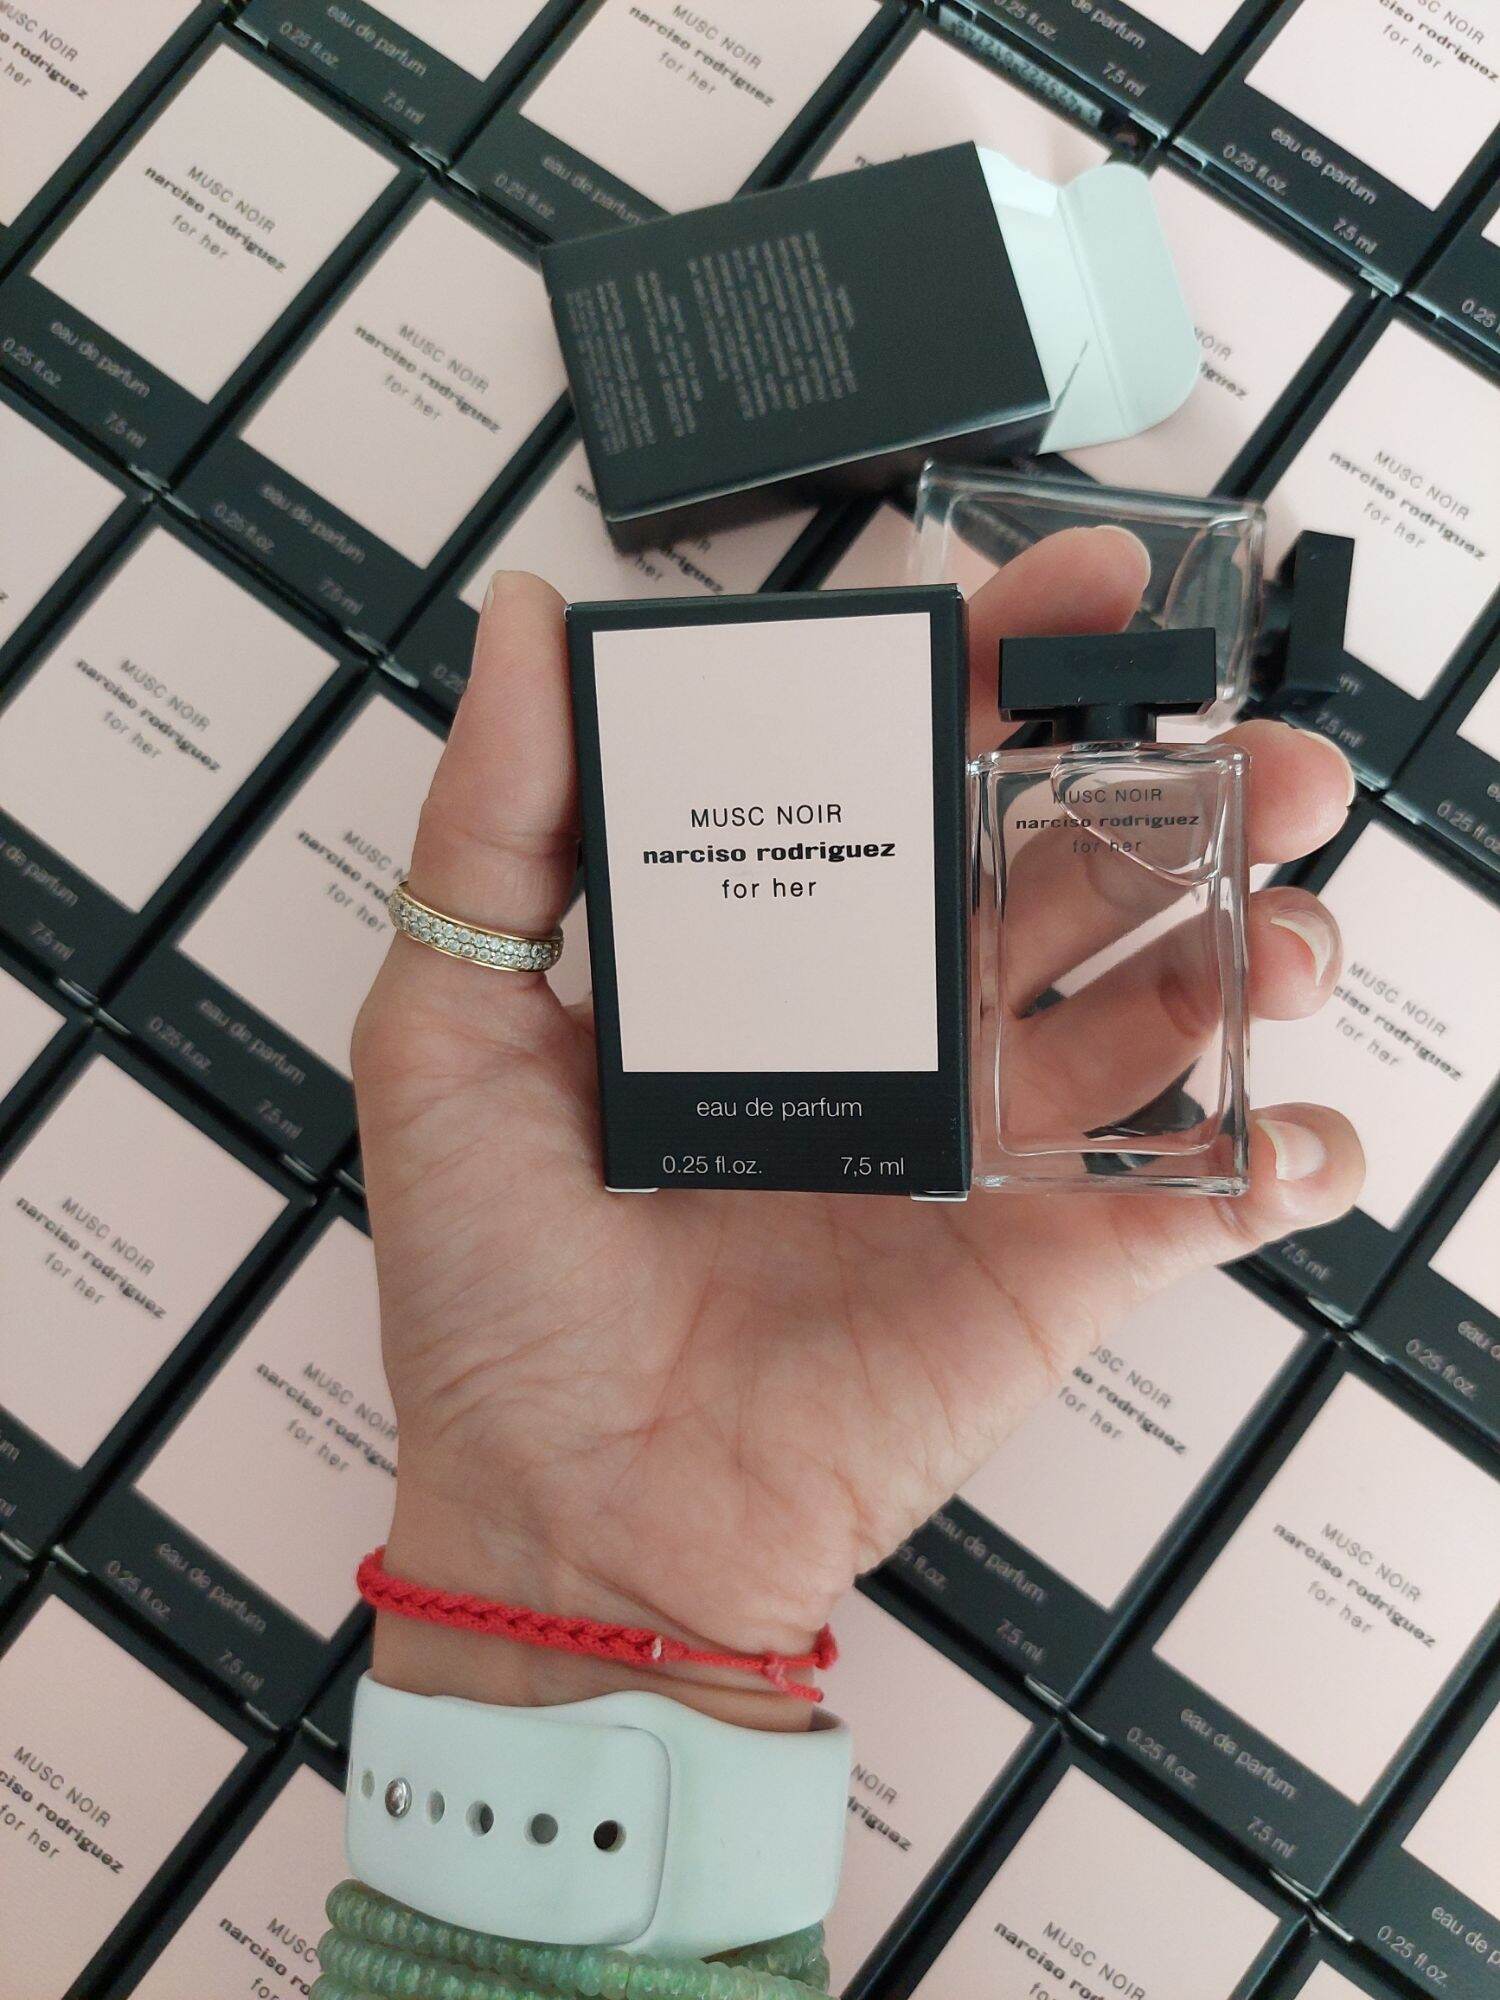 NARCISO RODRIGUEZ MUSC NOIR FOR HER EDP 7,5ML# Ở ĐÂY SHOP CHỈ BÁN HÀNG AUTHENTIC#